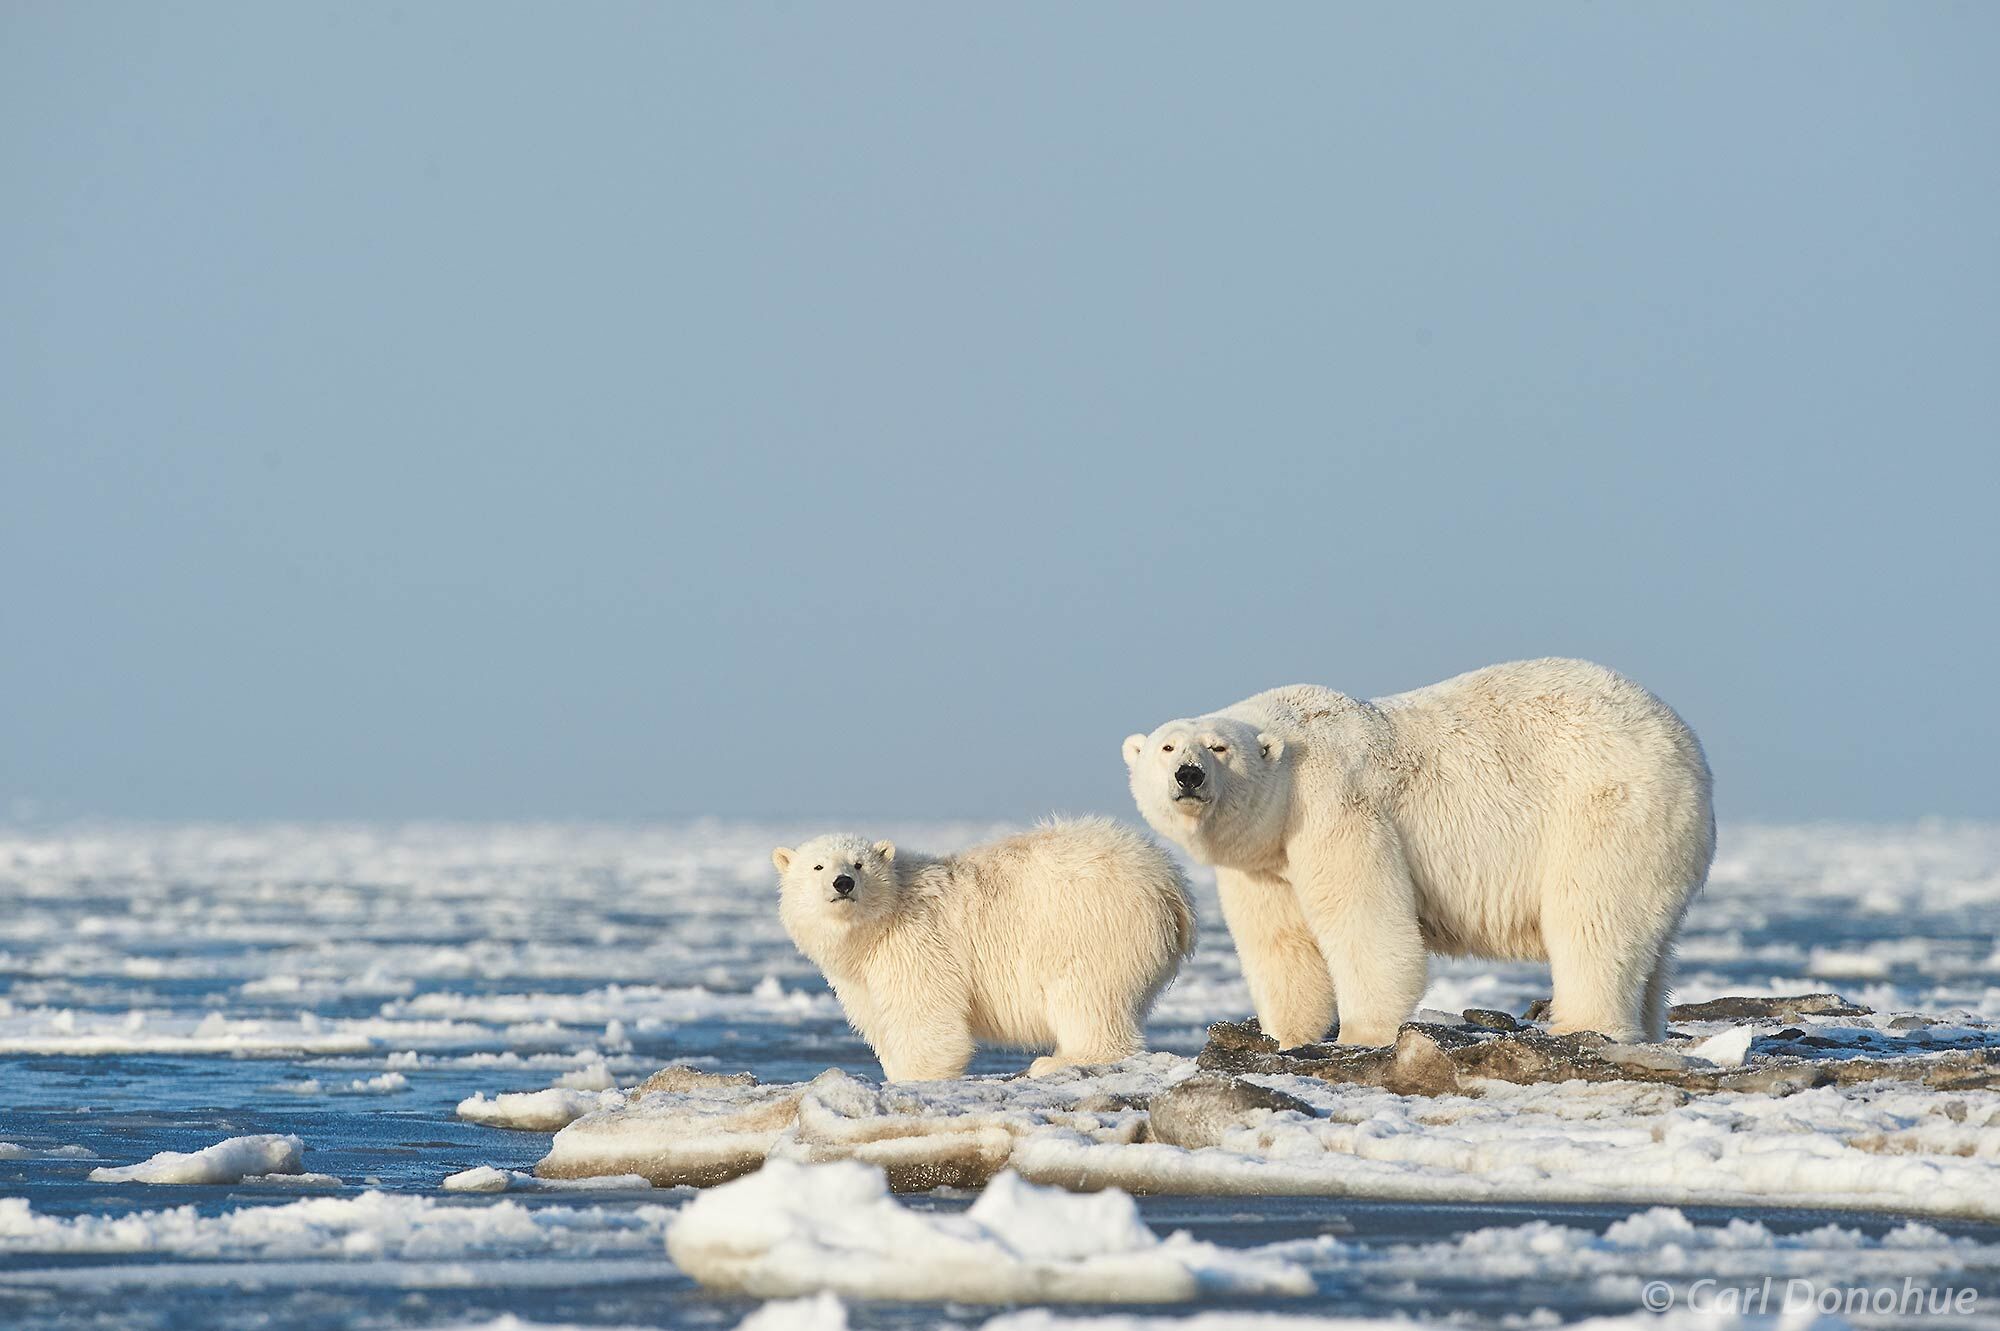 A large female polar bear, or sow, stands on the shores of the Southern Beaufort Sea with her 2 year old cub, waiting the ice...